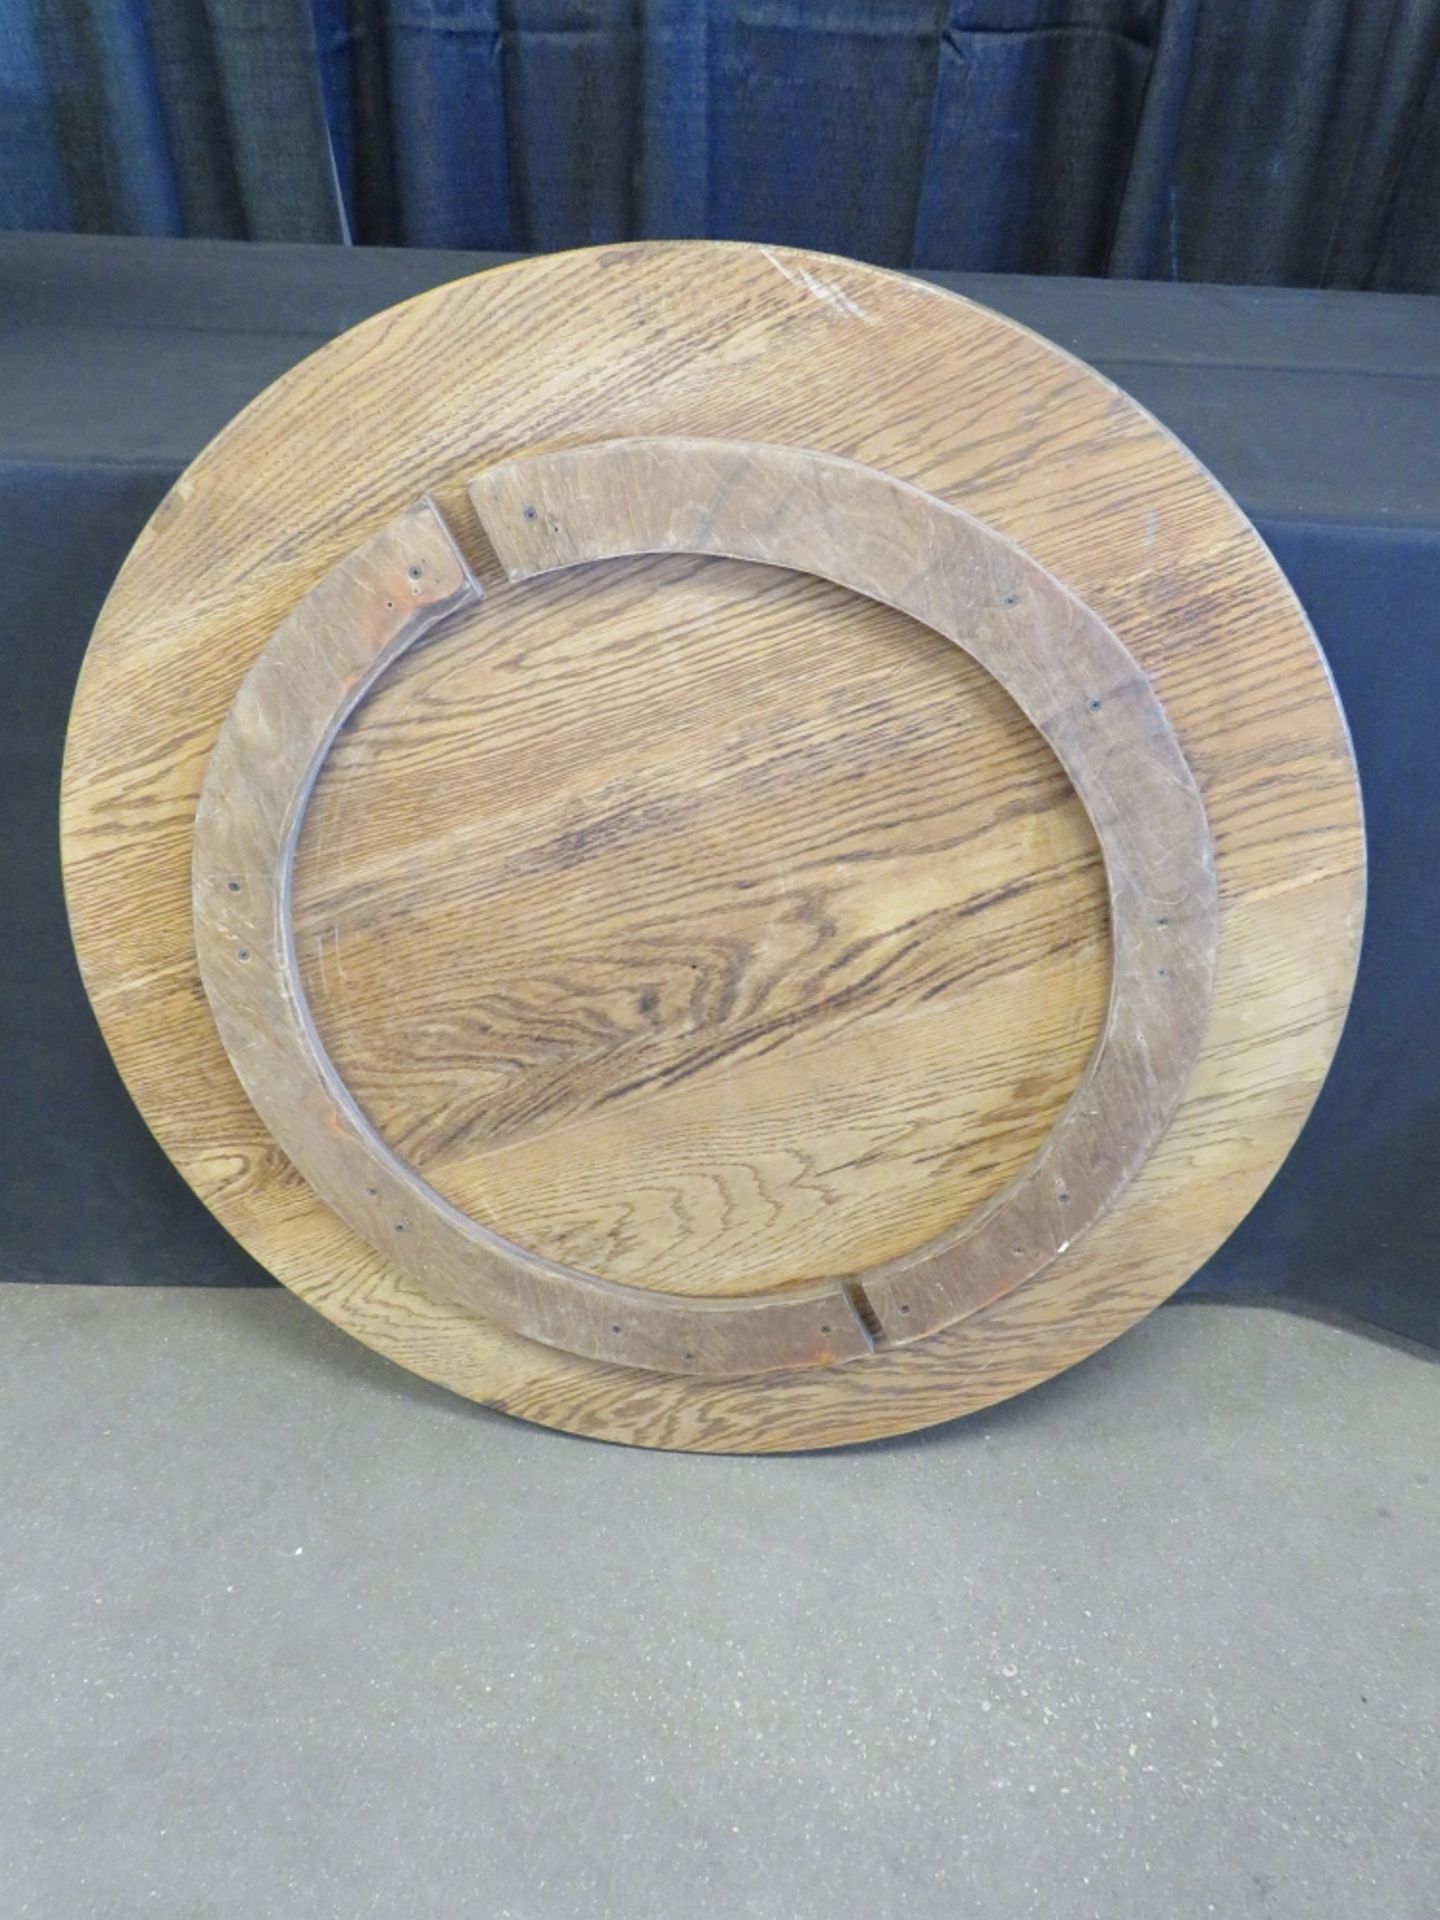 36" RUSTIC OAK WOOD ROUND TOP FOR BARREL - Image 2 of 2